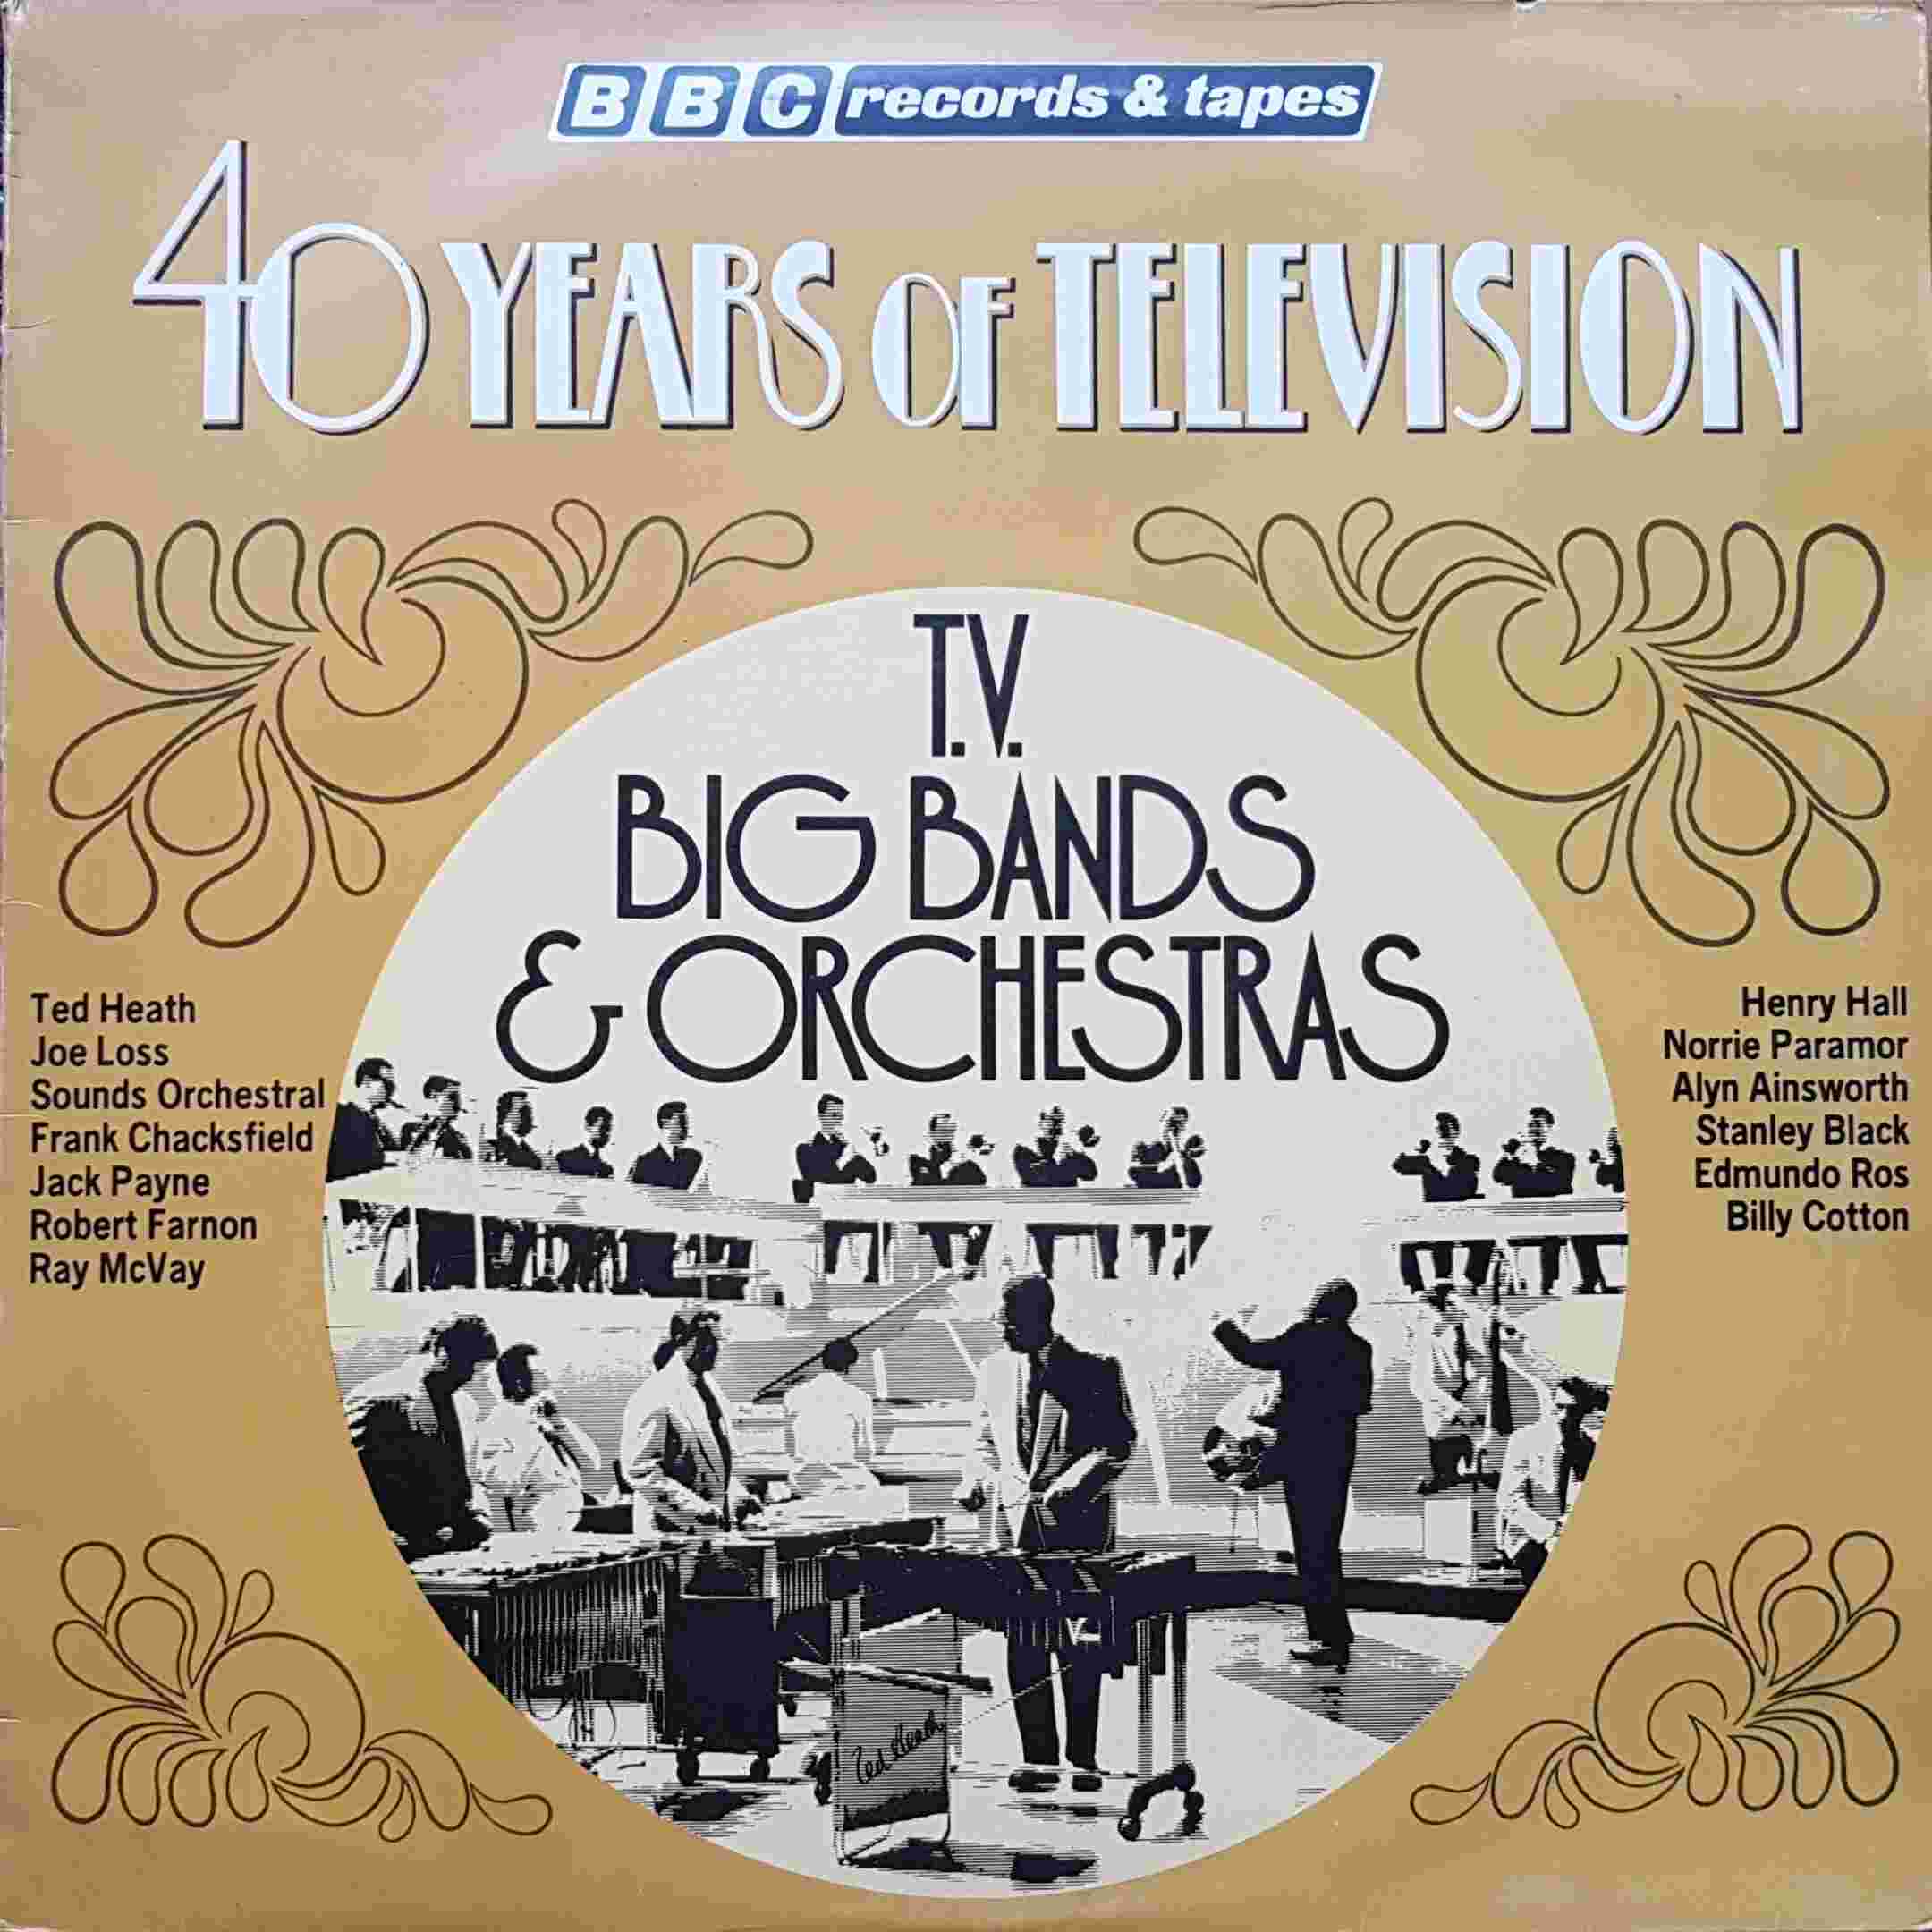 Picture of REB 245 TV big bands and orchestras by artist Various from the BBC albums - Records and Tapes library